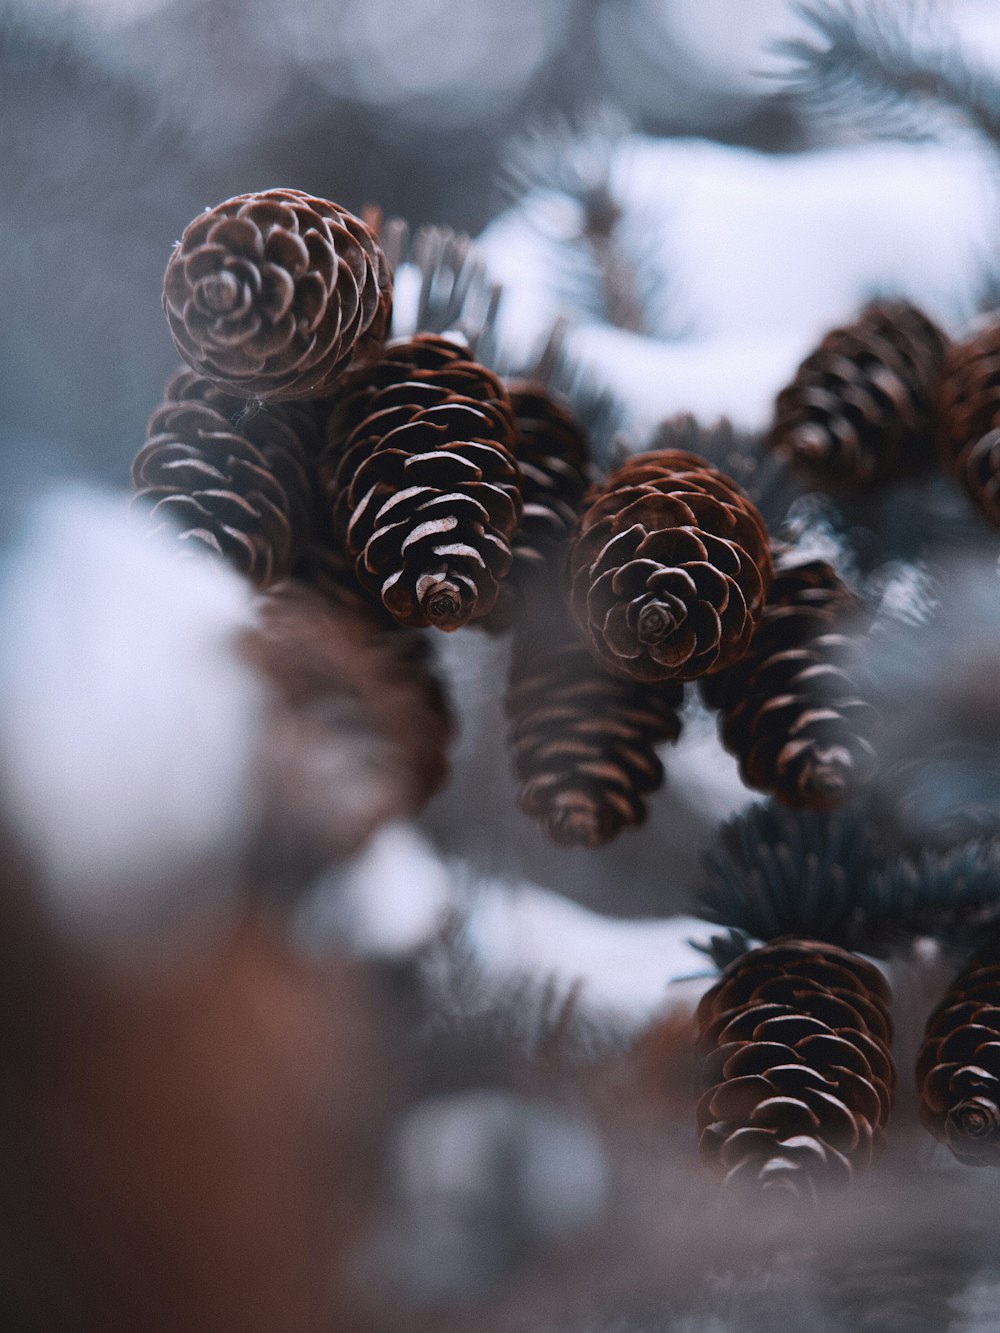 brown pine cone on snow covered ground